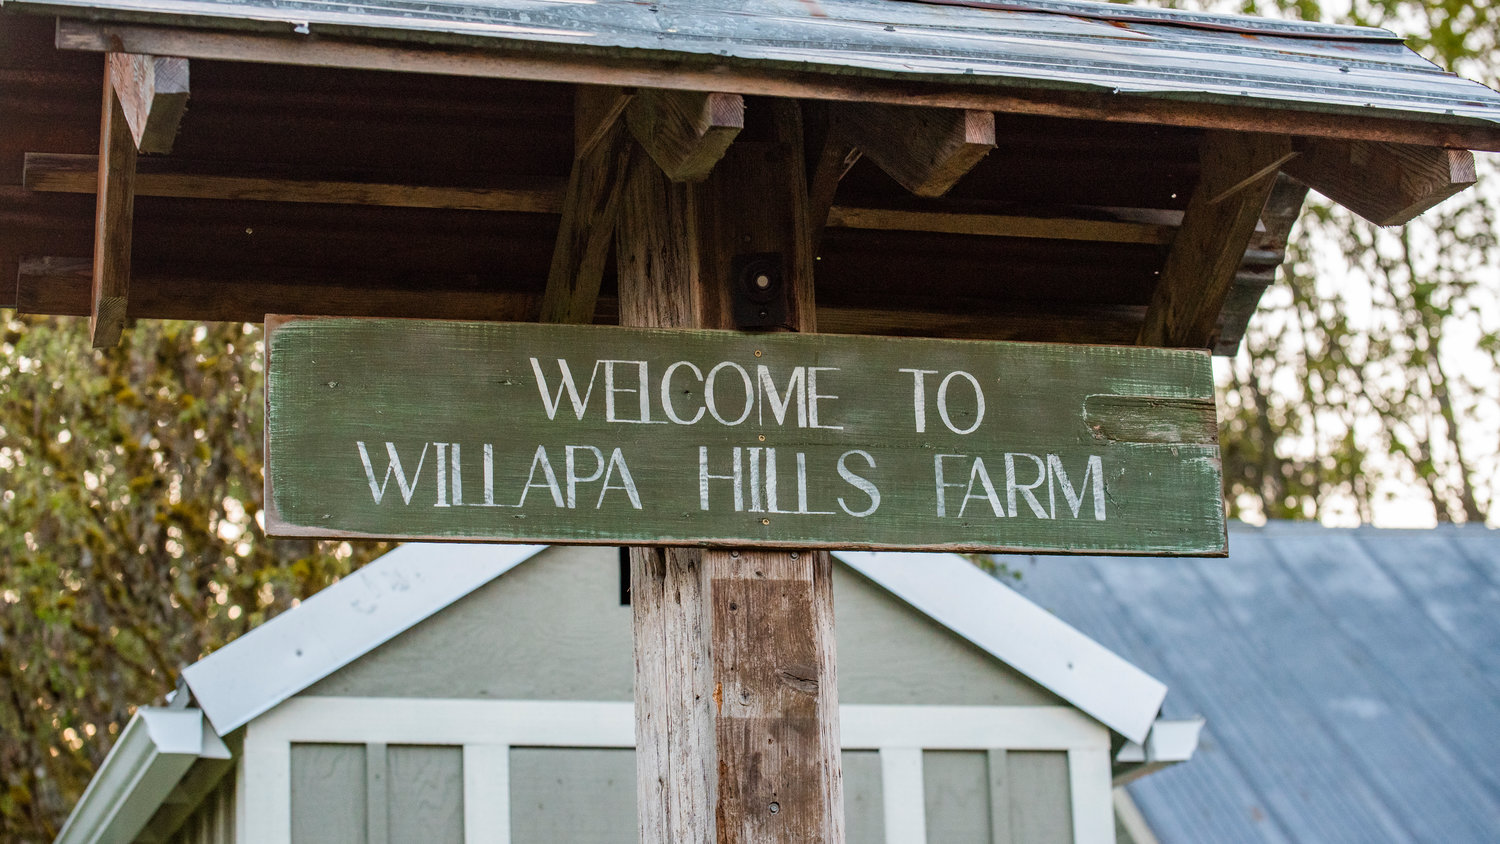 A sign welcomes visitors to the Willapa Hills Farm off state Route 6 in Doty.